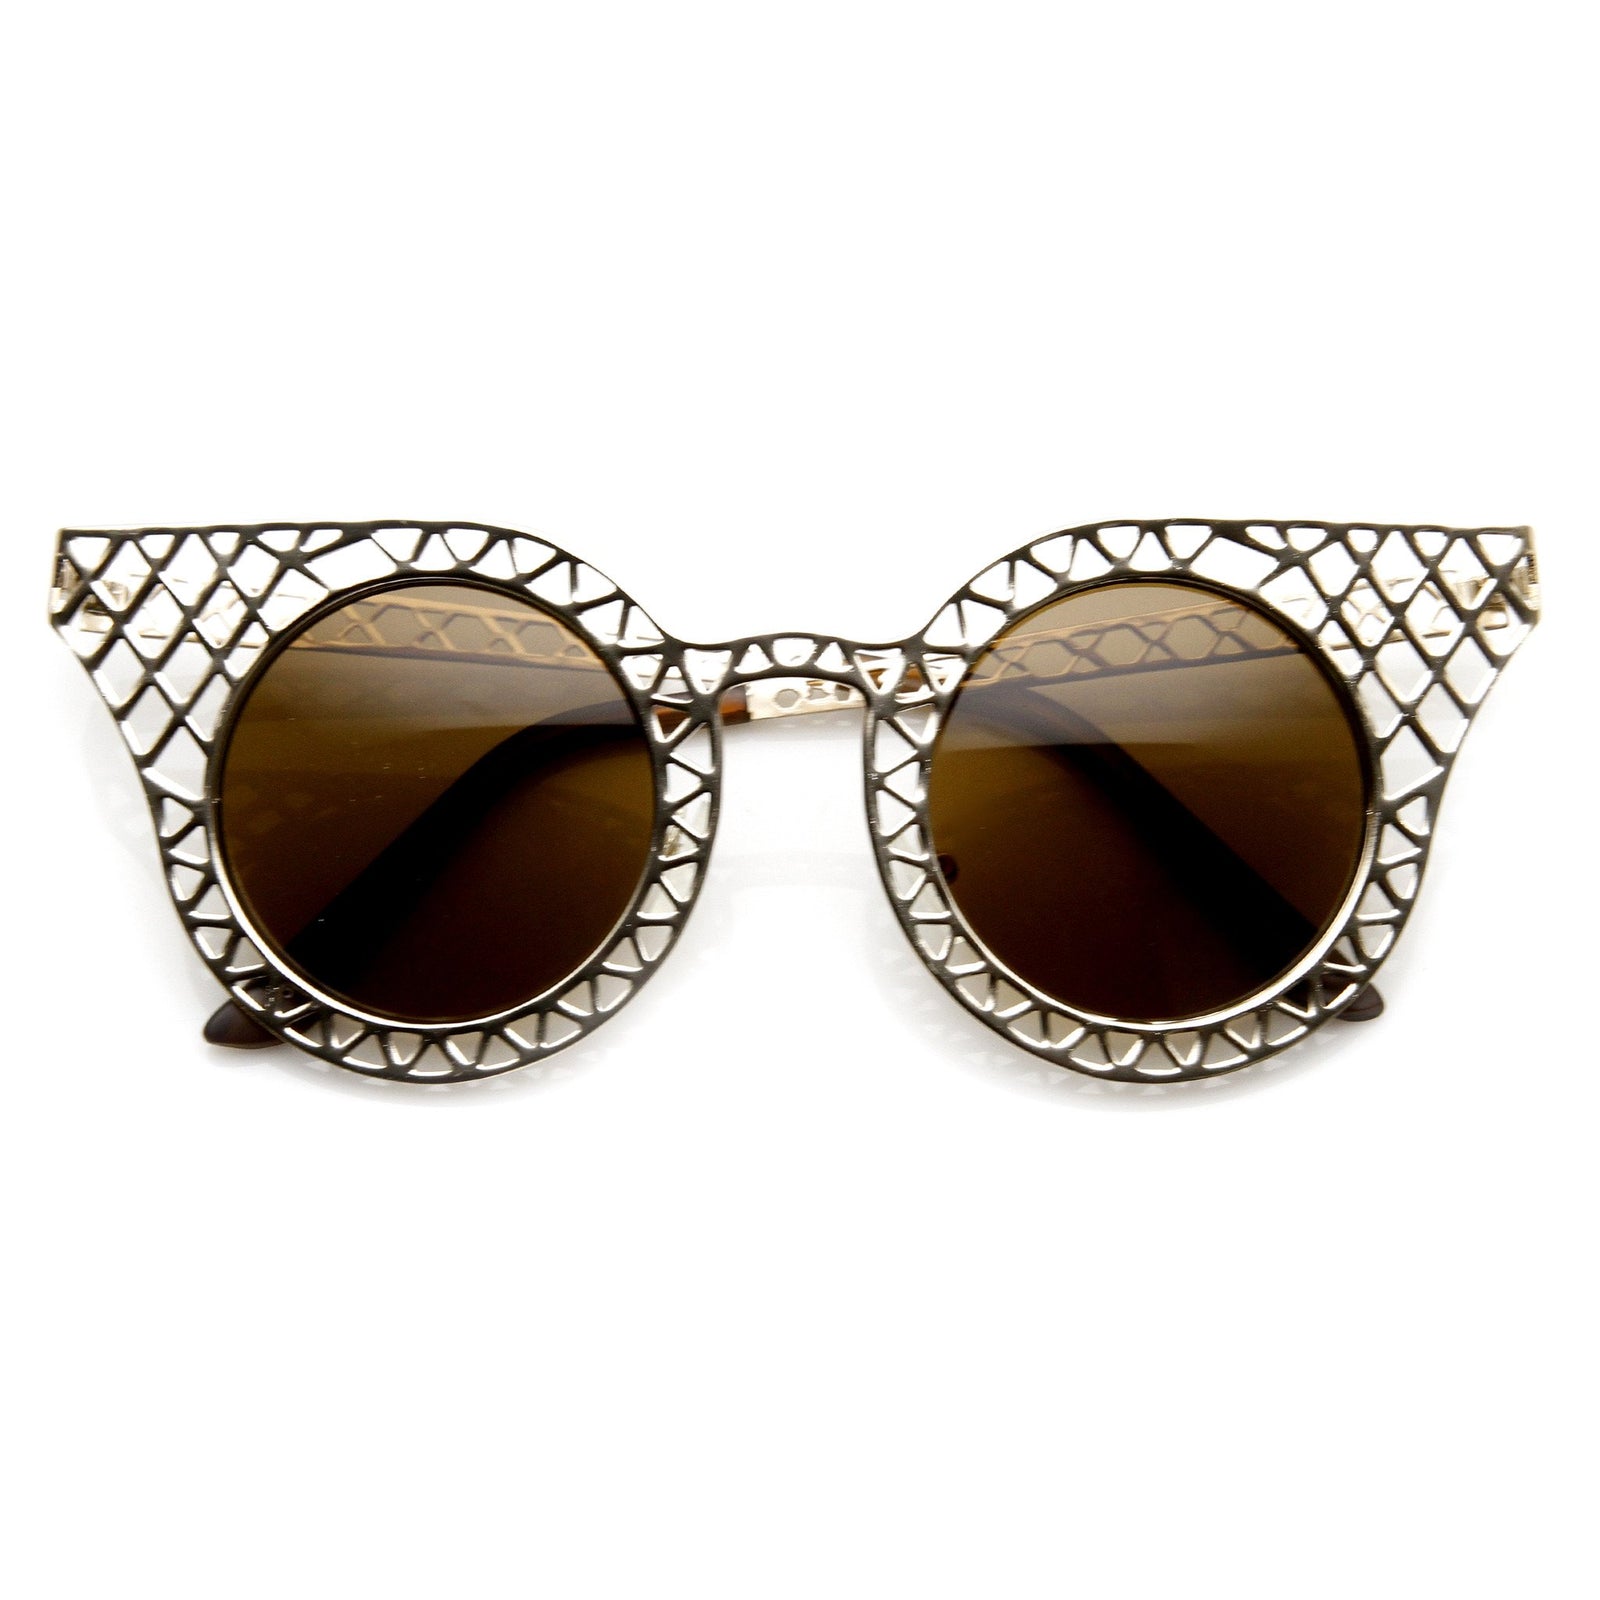 Fashion Sunglasses with Chain Arm | Top Notch Black and Gold — V Shades